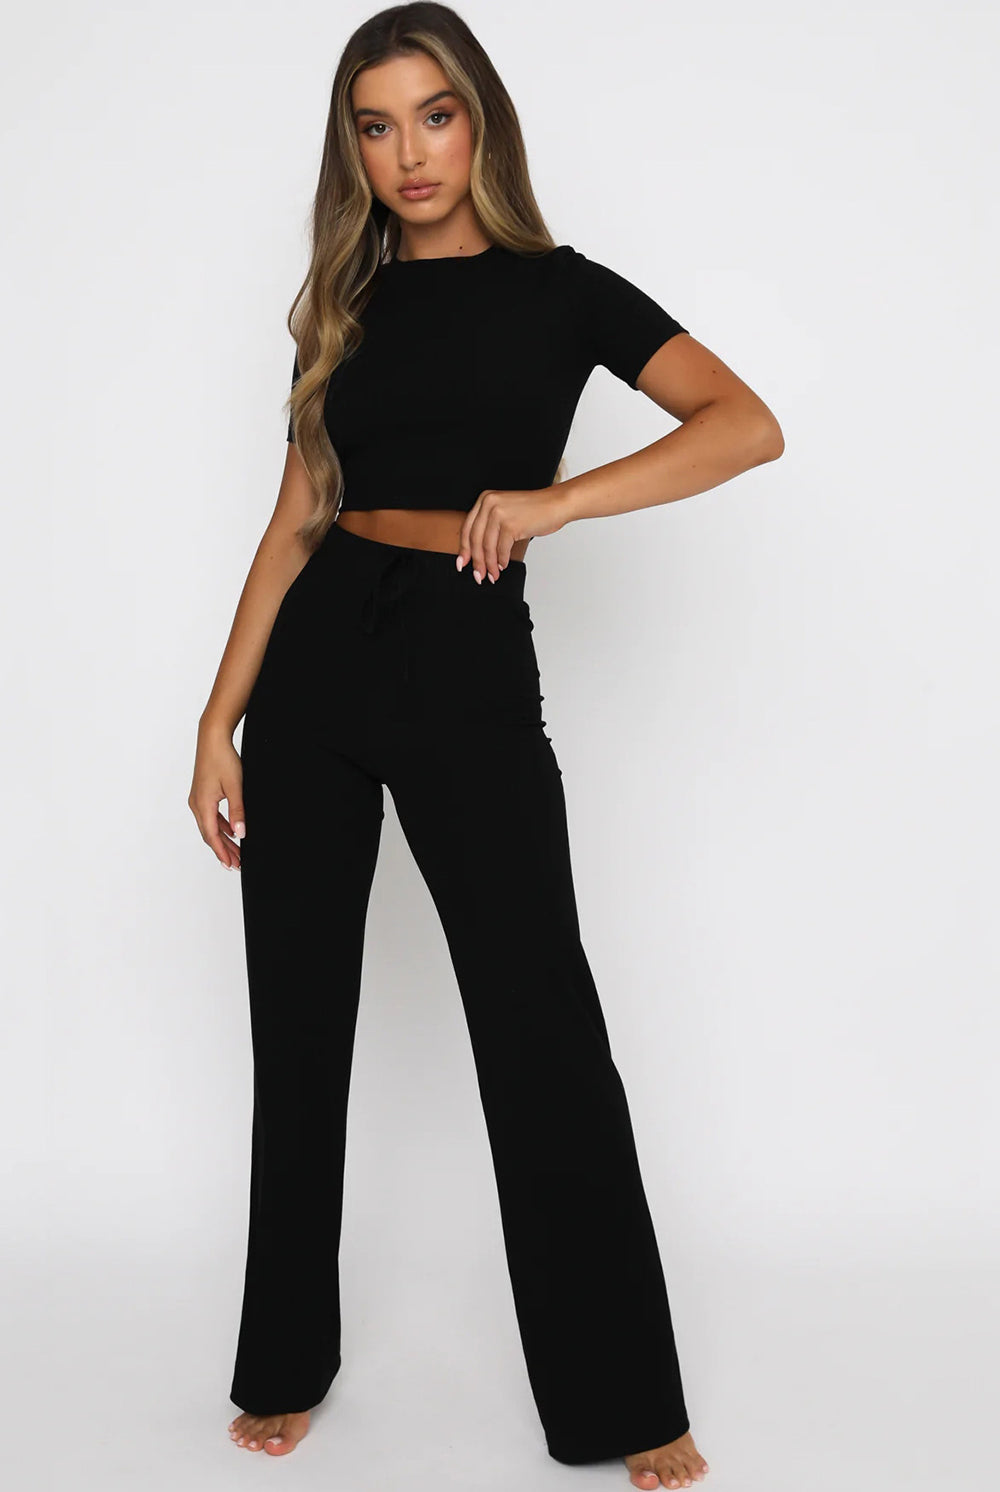 Round Neck Short Sleeve Top and Pants Set - GemThreads Boutique Round Neck Short Sleeve Top and Pants Set